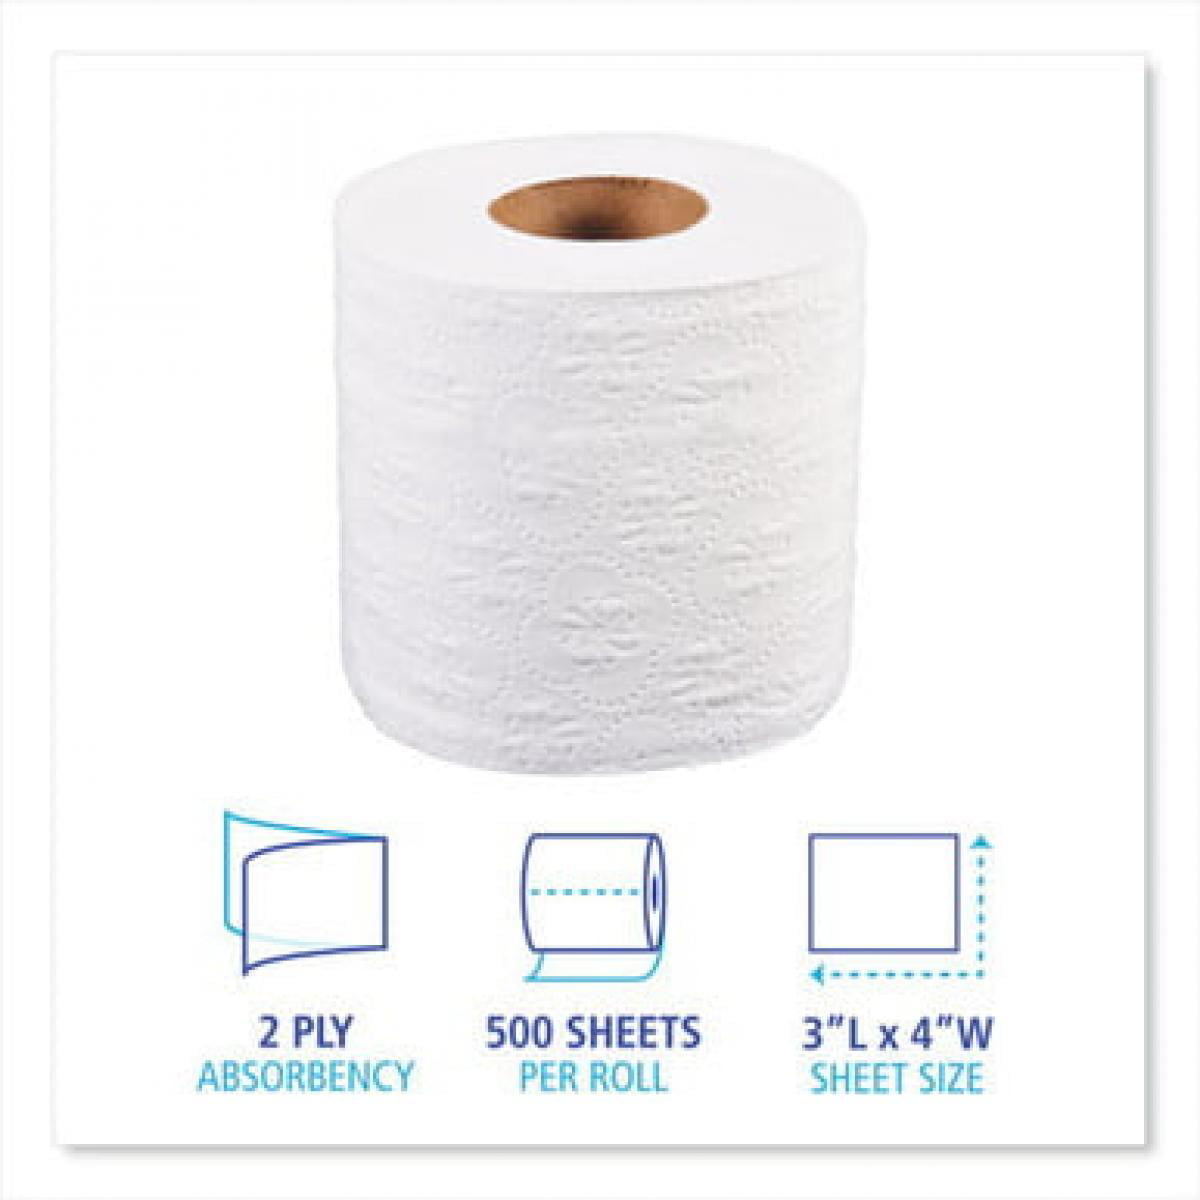 Boardwalk Two-Ply Toilet Tissue Standard Septic Safe White 4 X 3 500 Sheets/Roll 96/Carton - 2